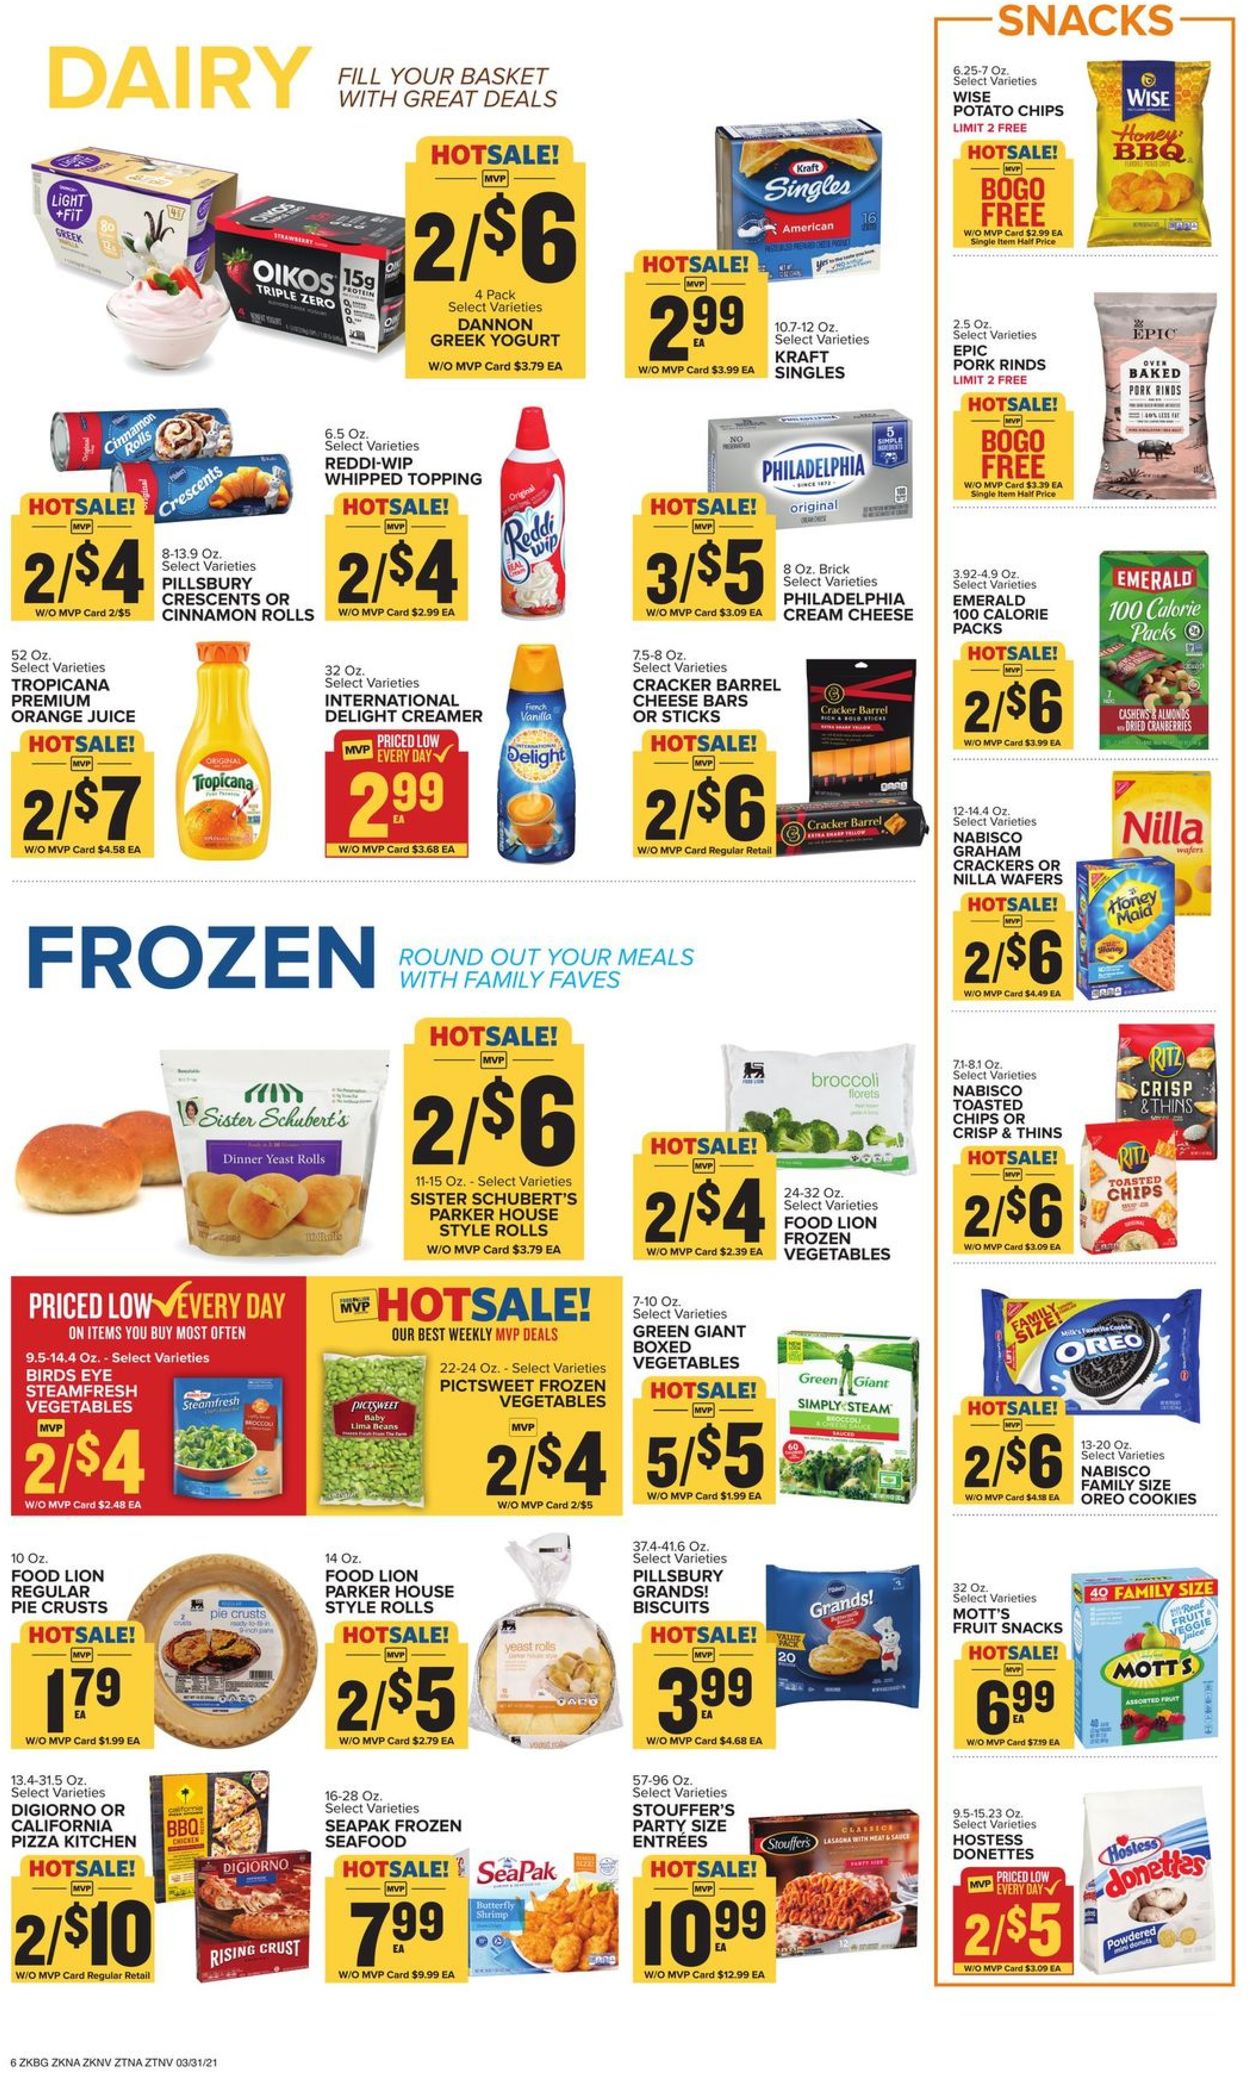 Food Lion Easter 2021 ad Current weekly ad 03/31 04/06/2021 [9